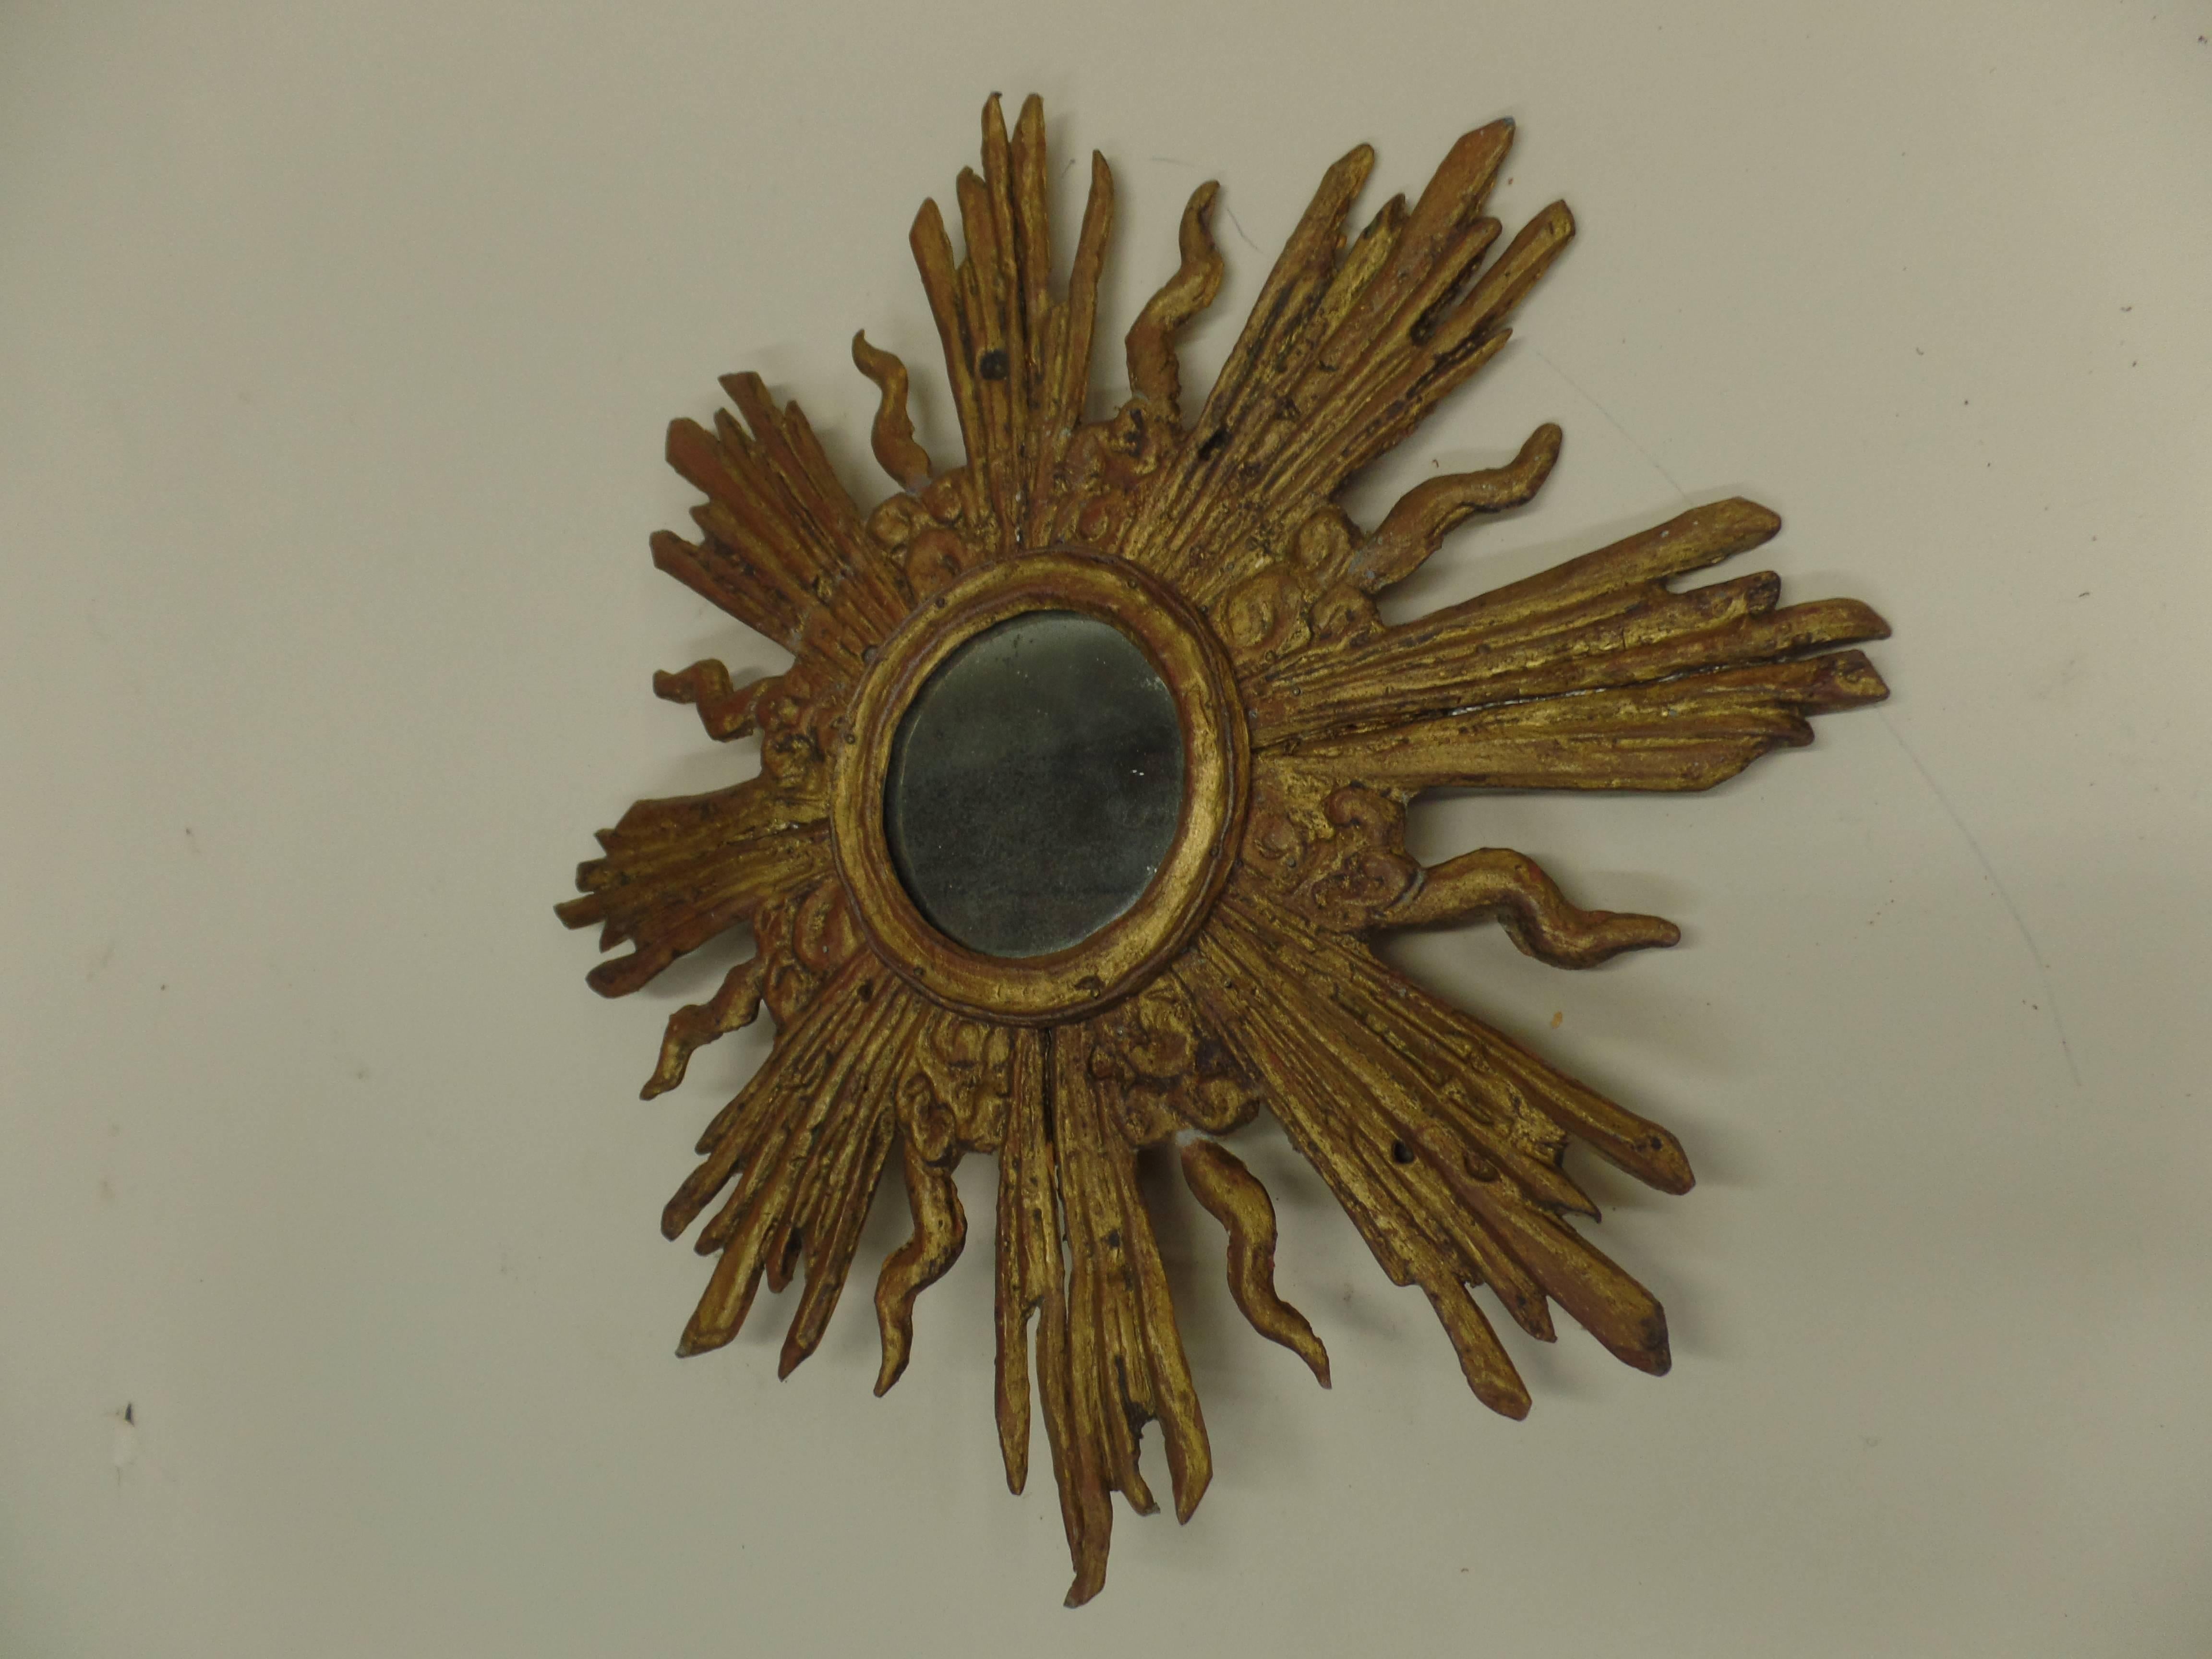 Louis XIV French Modern Neoclassical Gilt Lead Sunburst Mirror Attributed to Maison Jansen For Sale